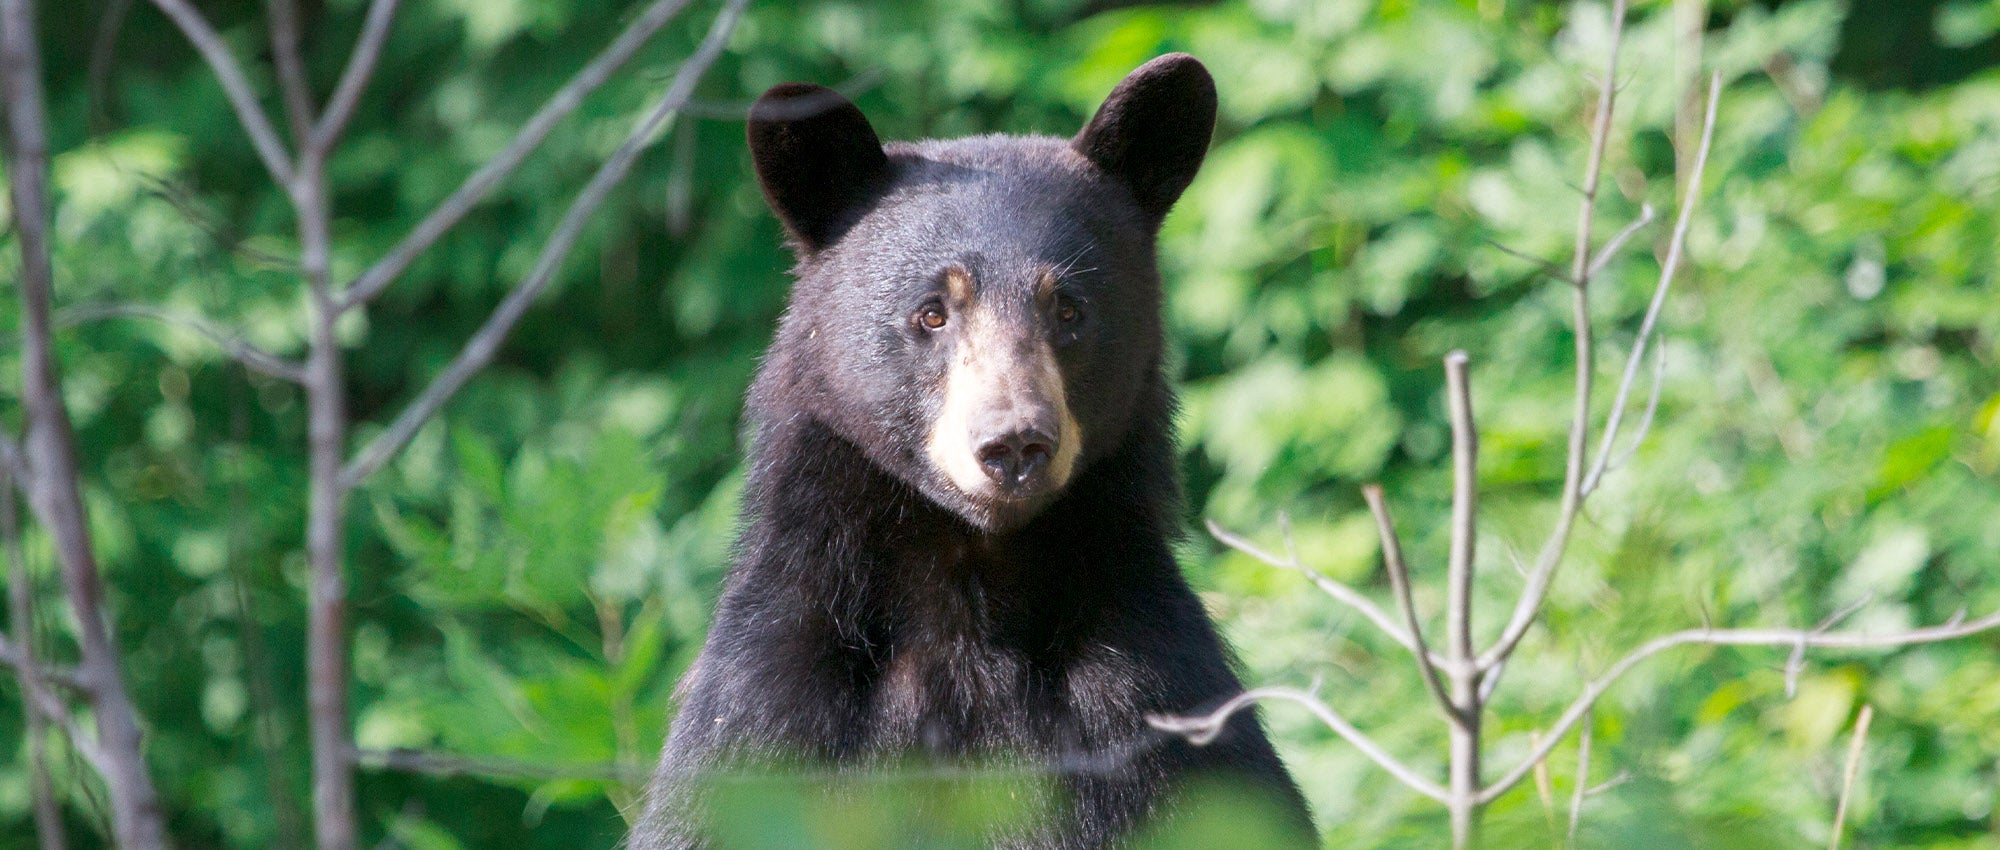 What to do about black bears | The Humane Society of the United States